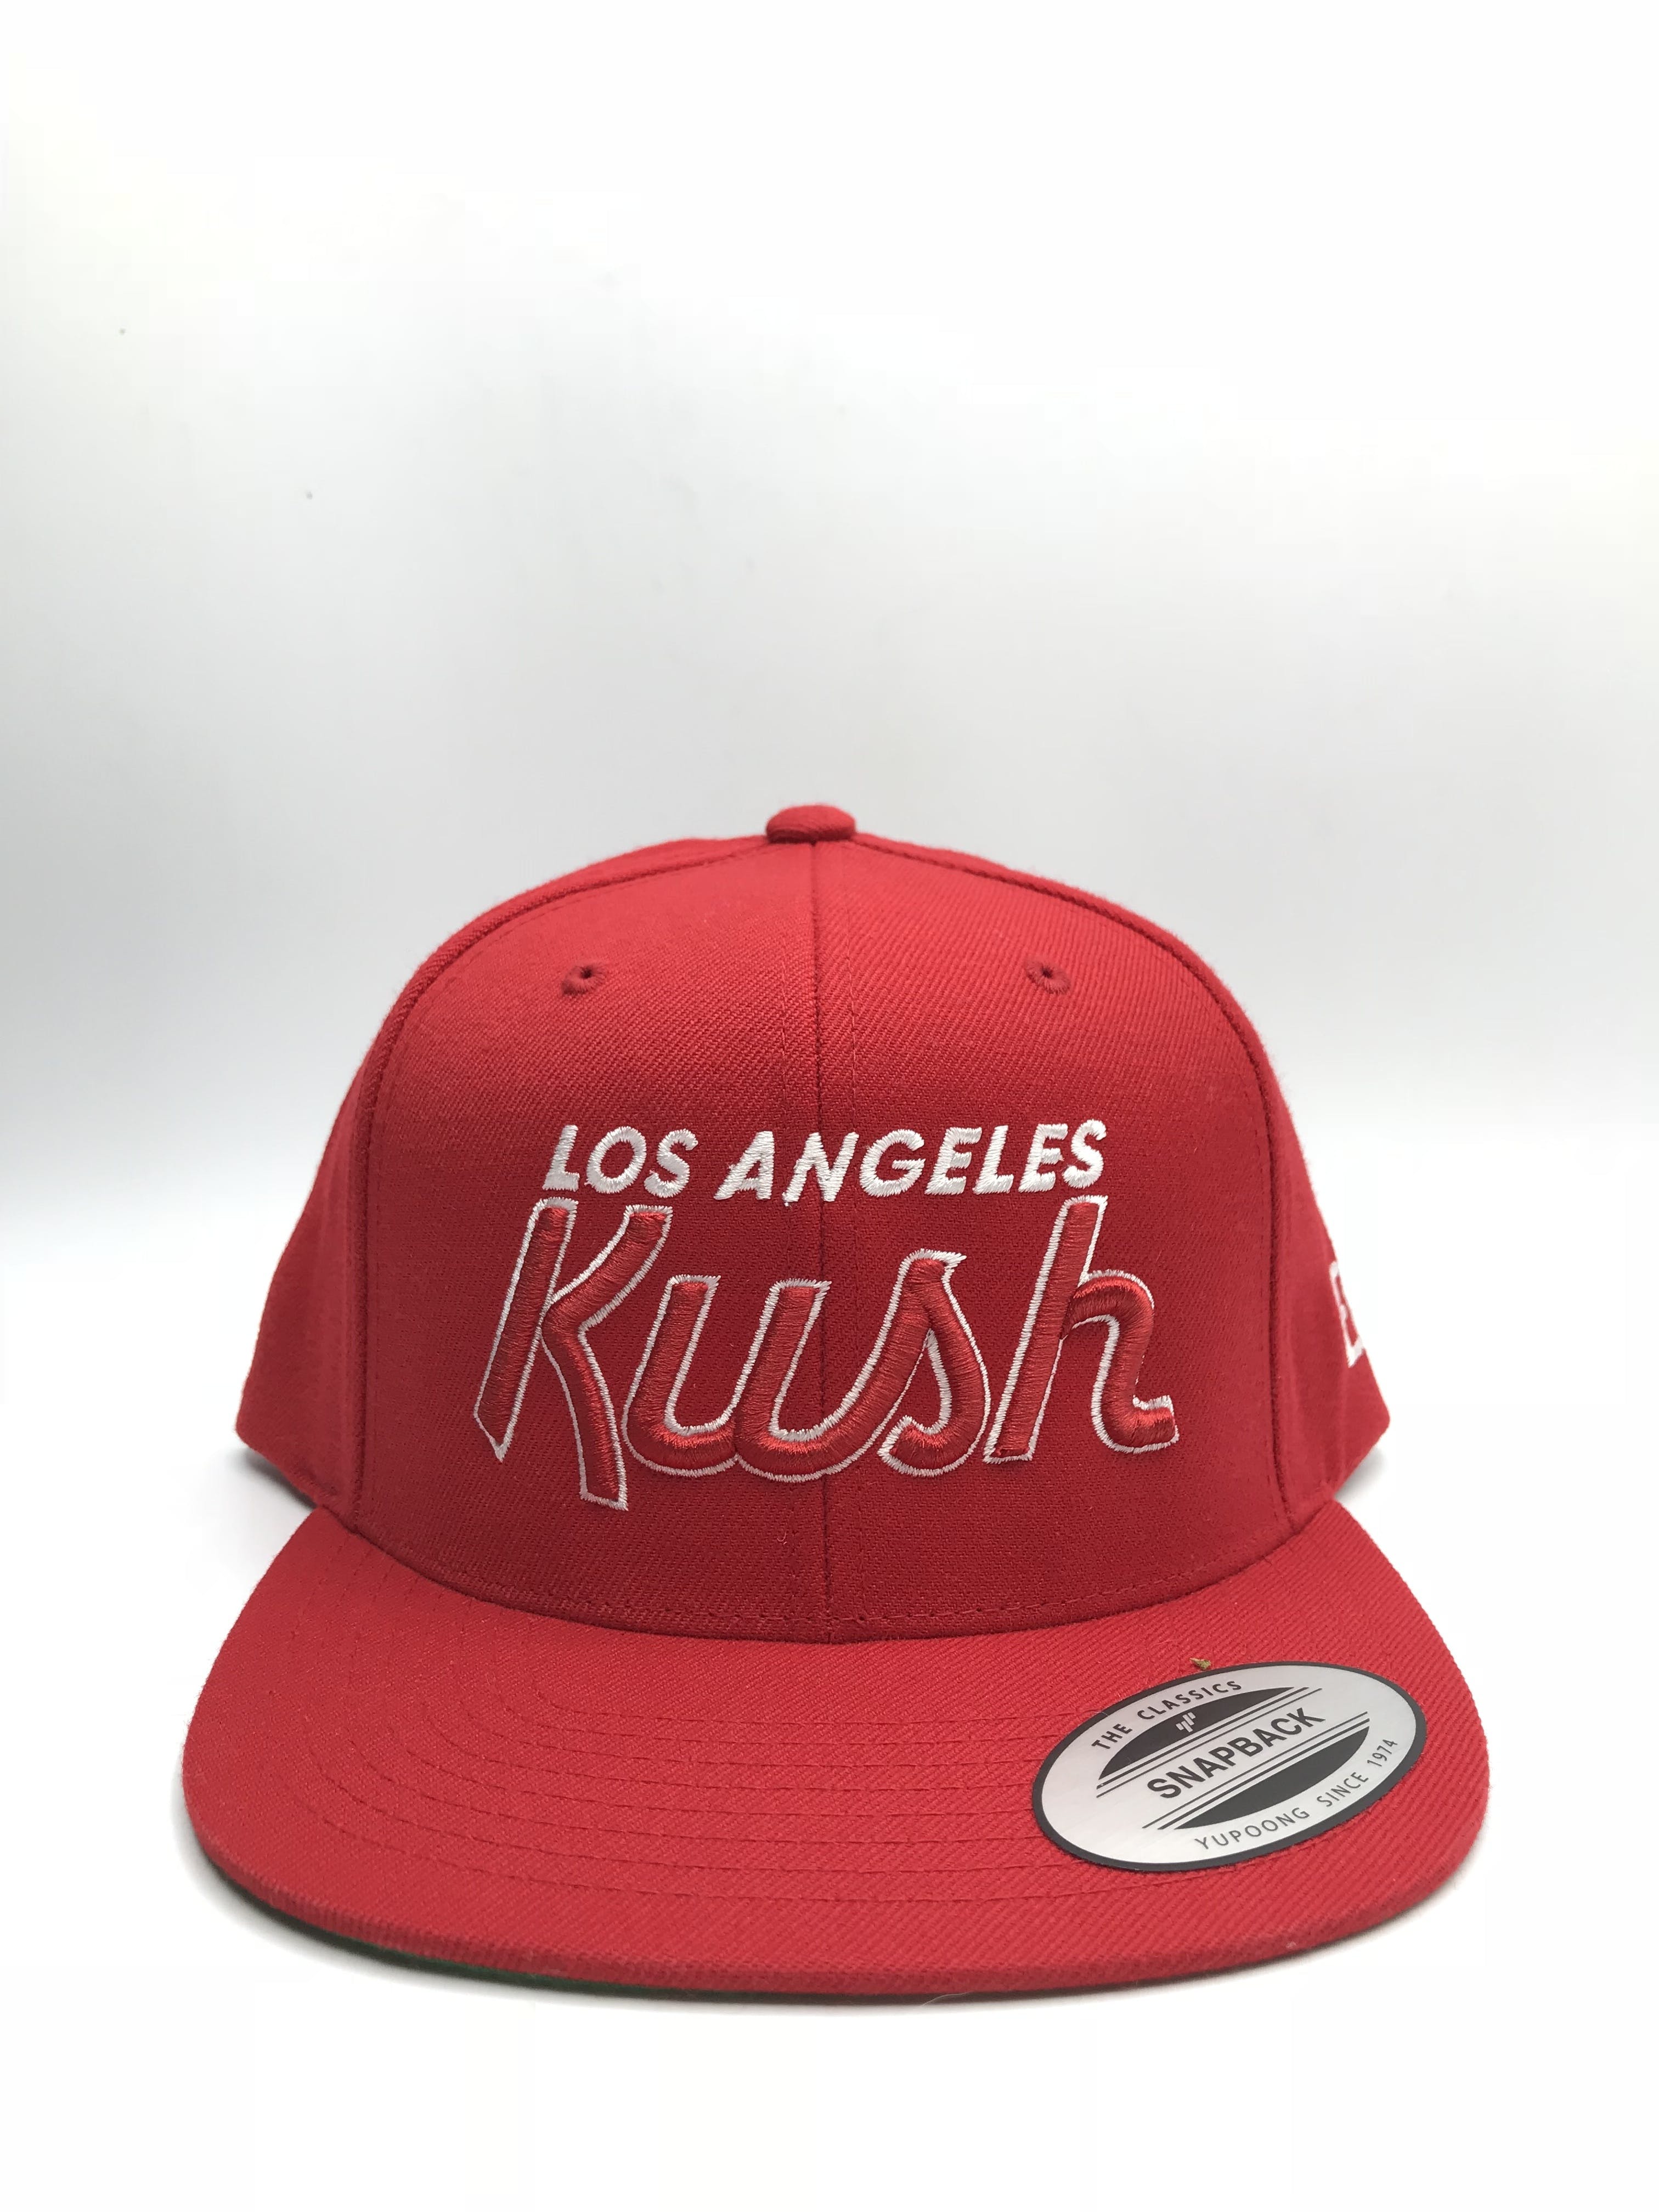 gear-lak-snapback-red-w-red-a-white-lettering